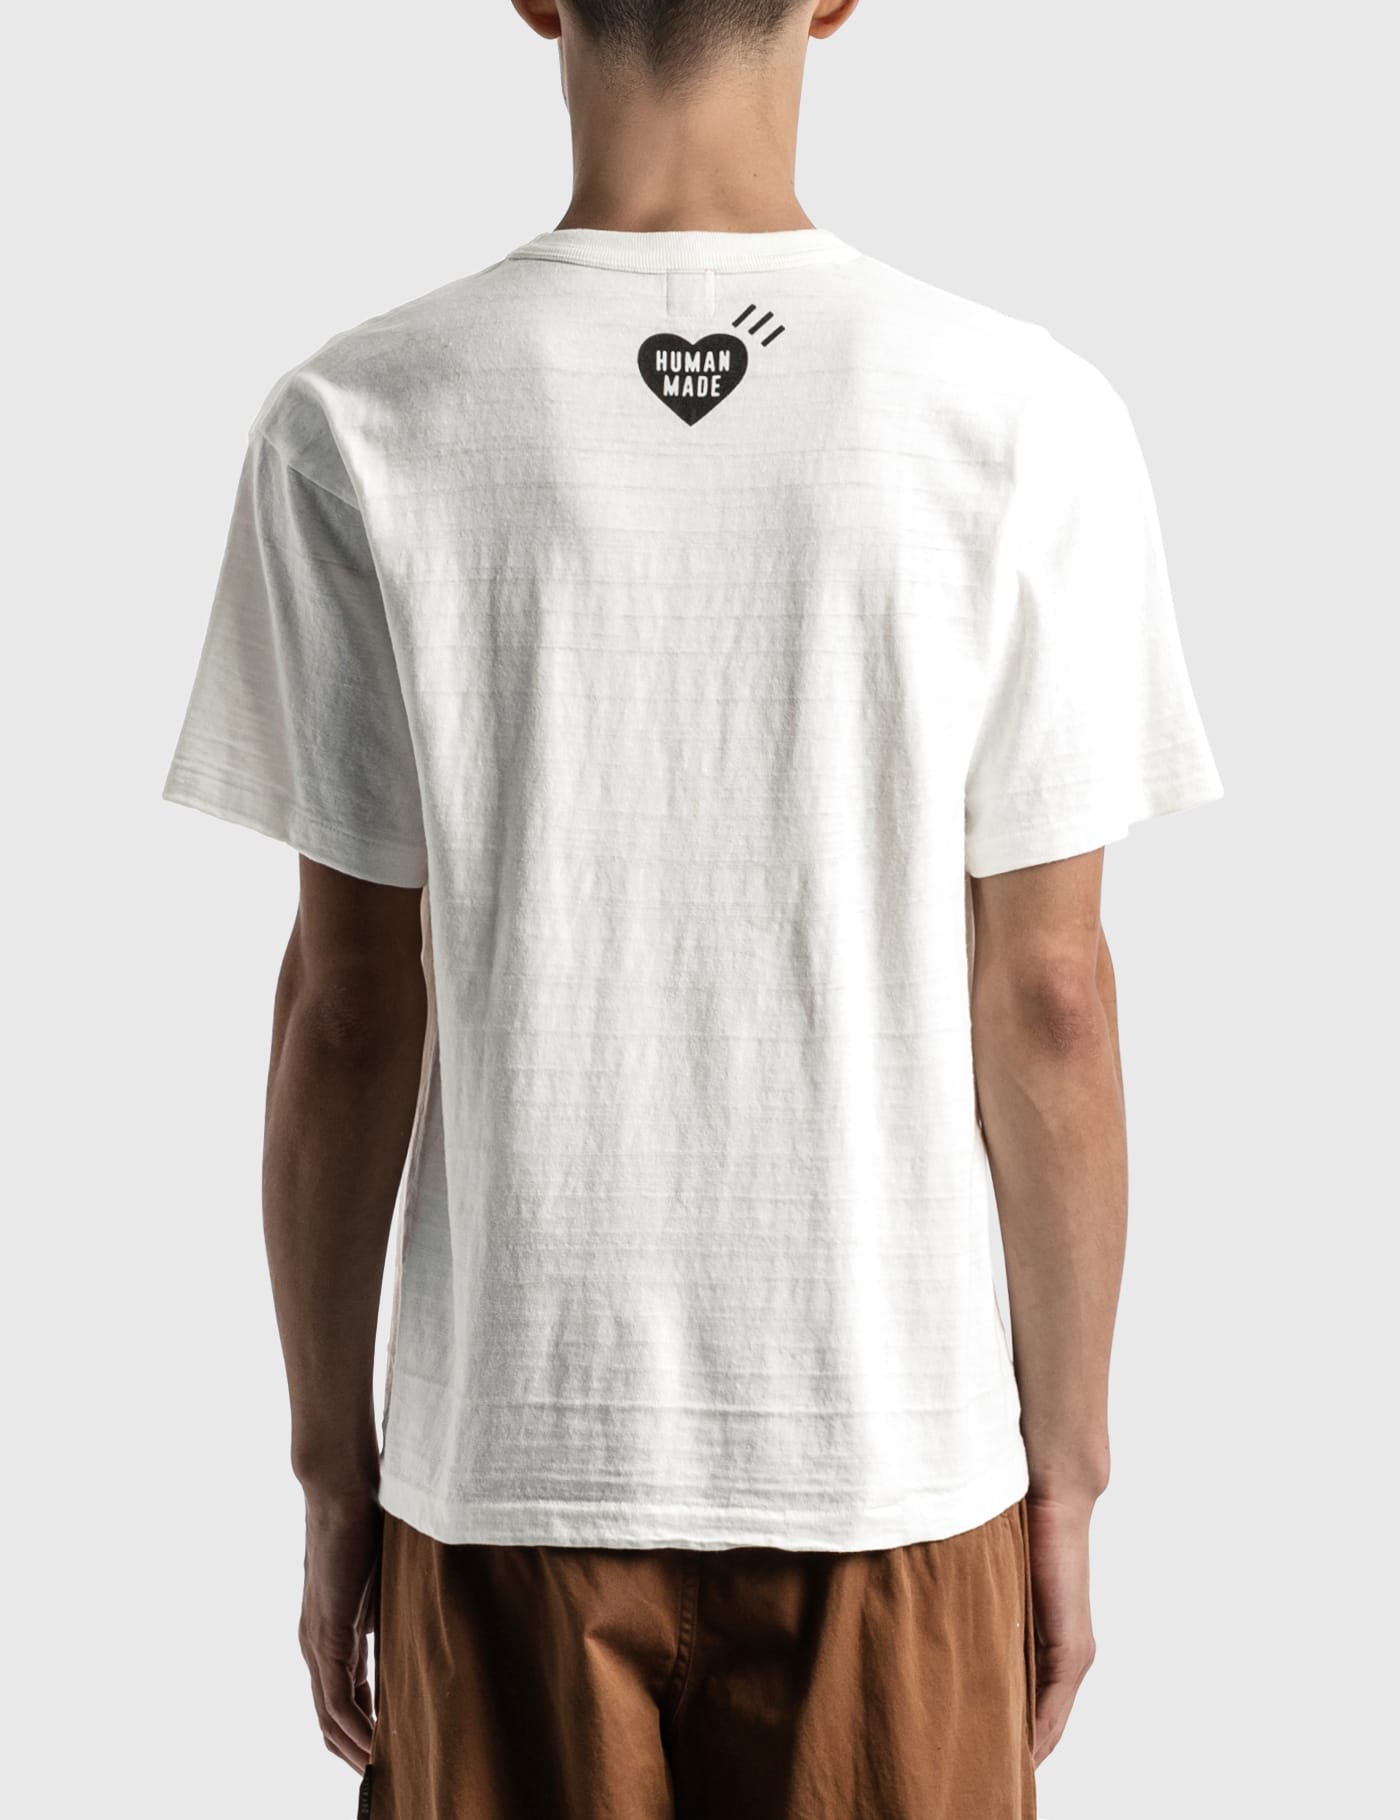 Human Made - T-shirt #2101 | HBX - Globally Curated Fashion and